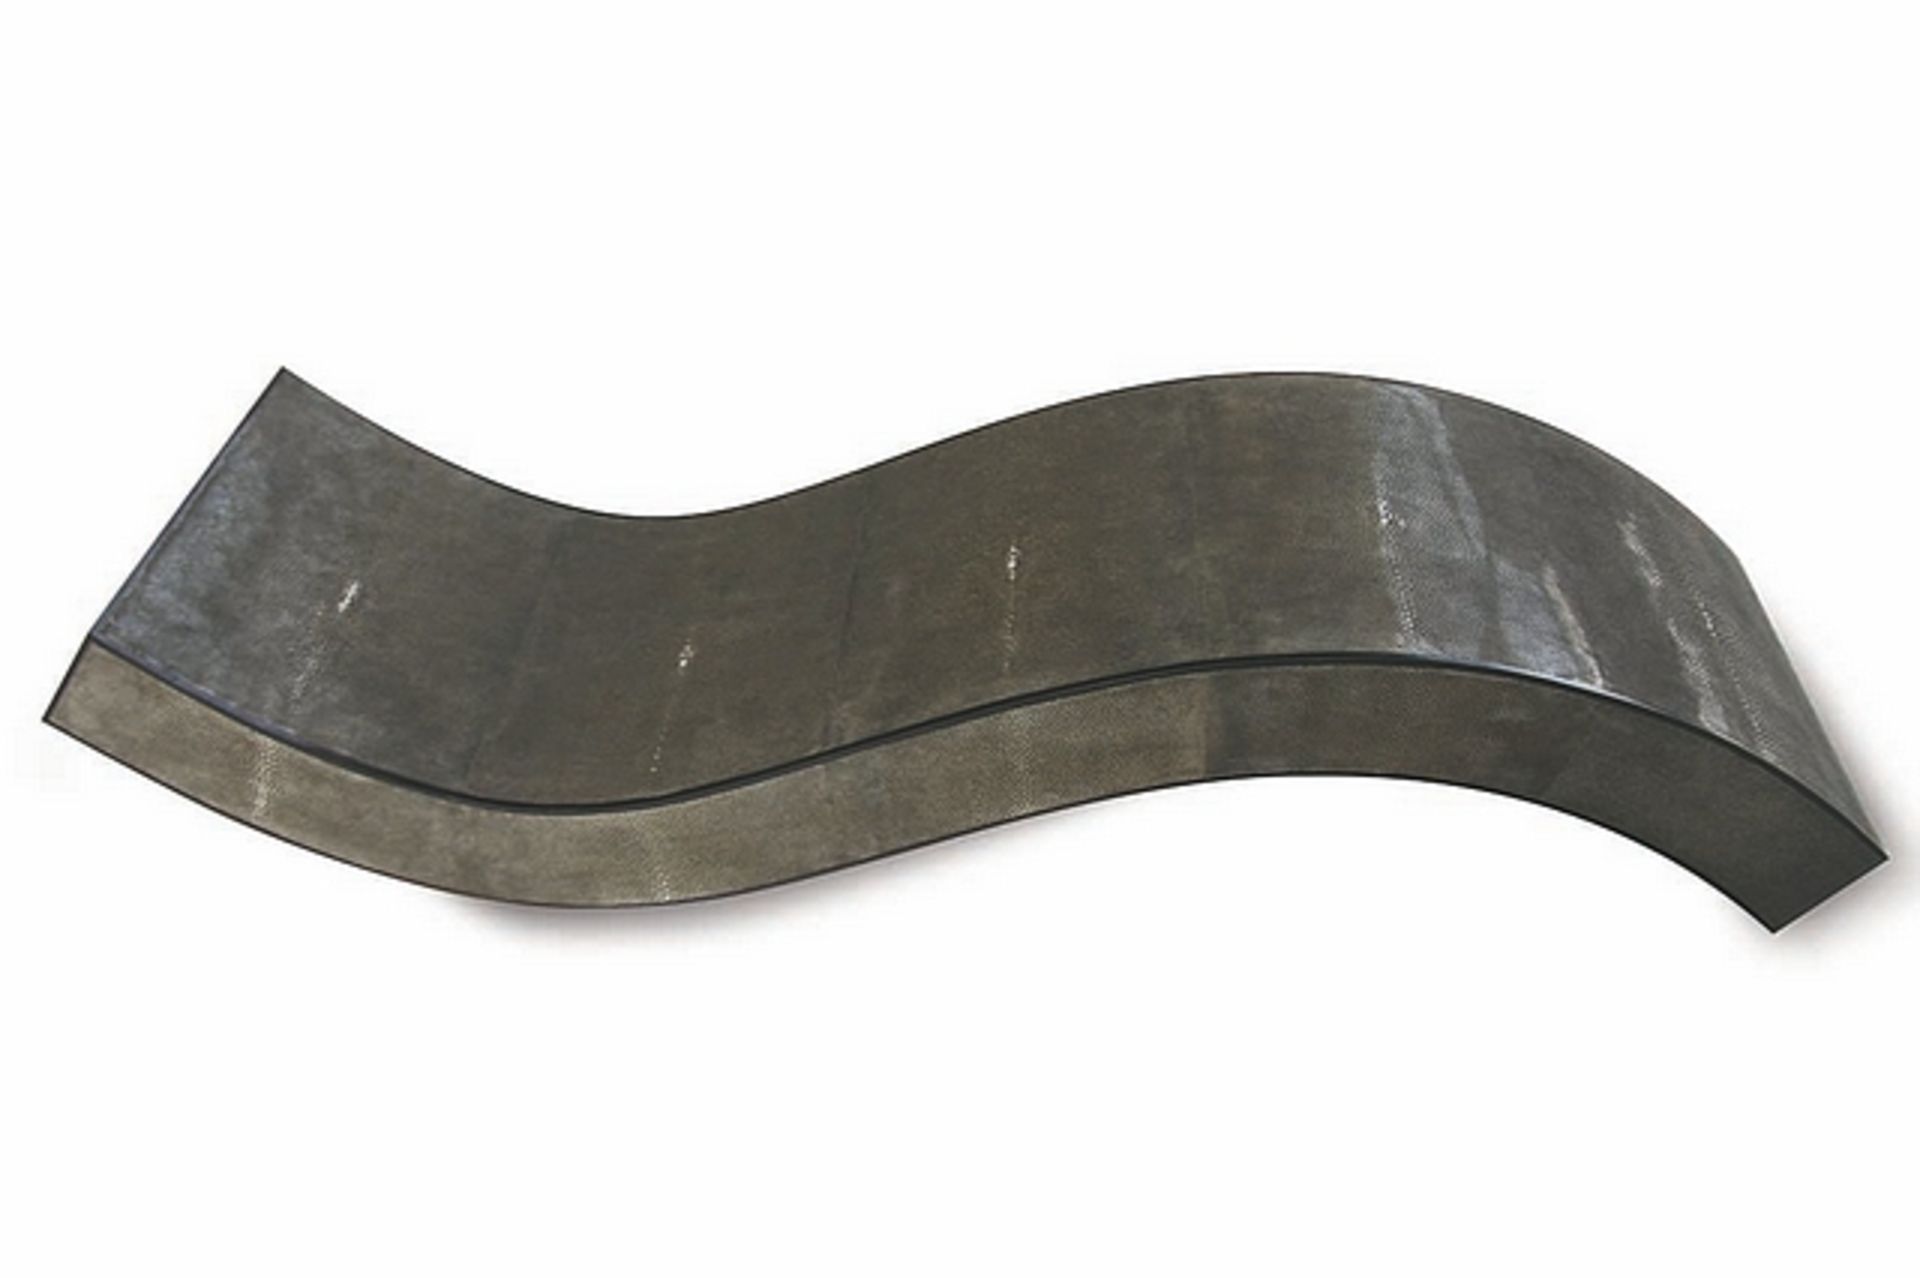 Wave object wave tabac stingray tabac parchment and ebony, calming elements of the sea slowing